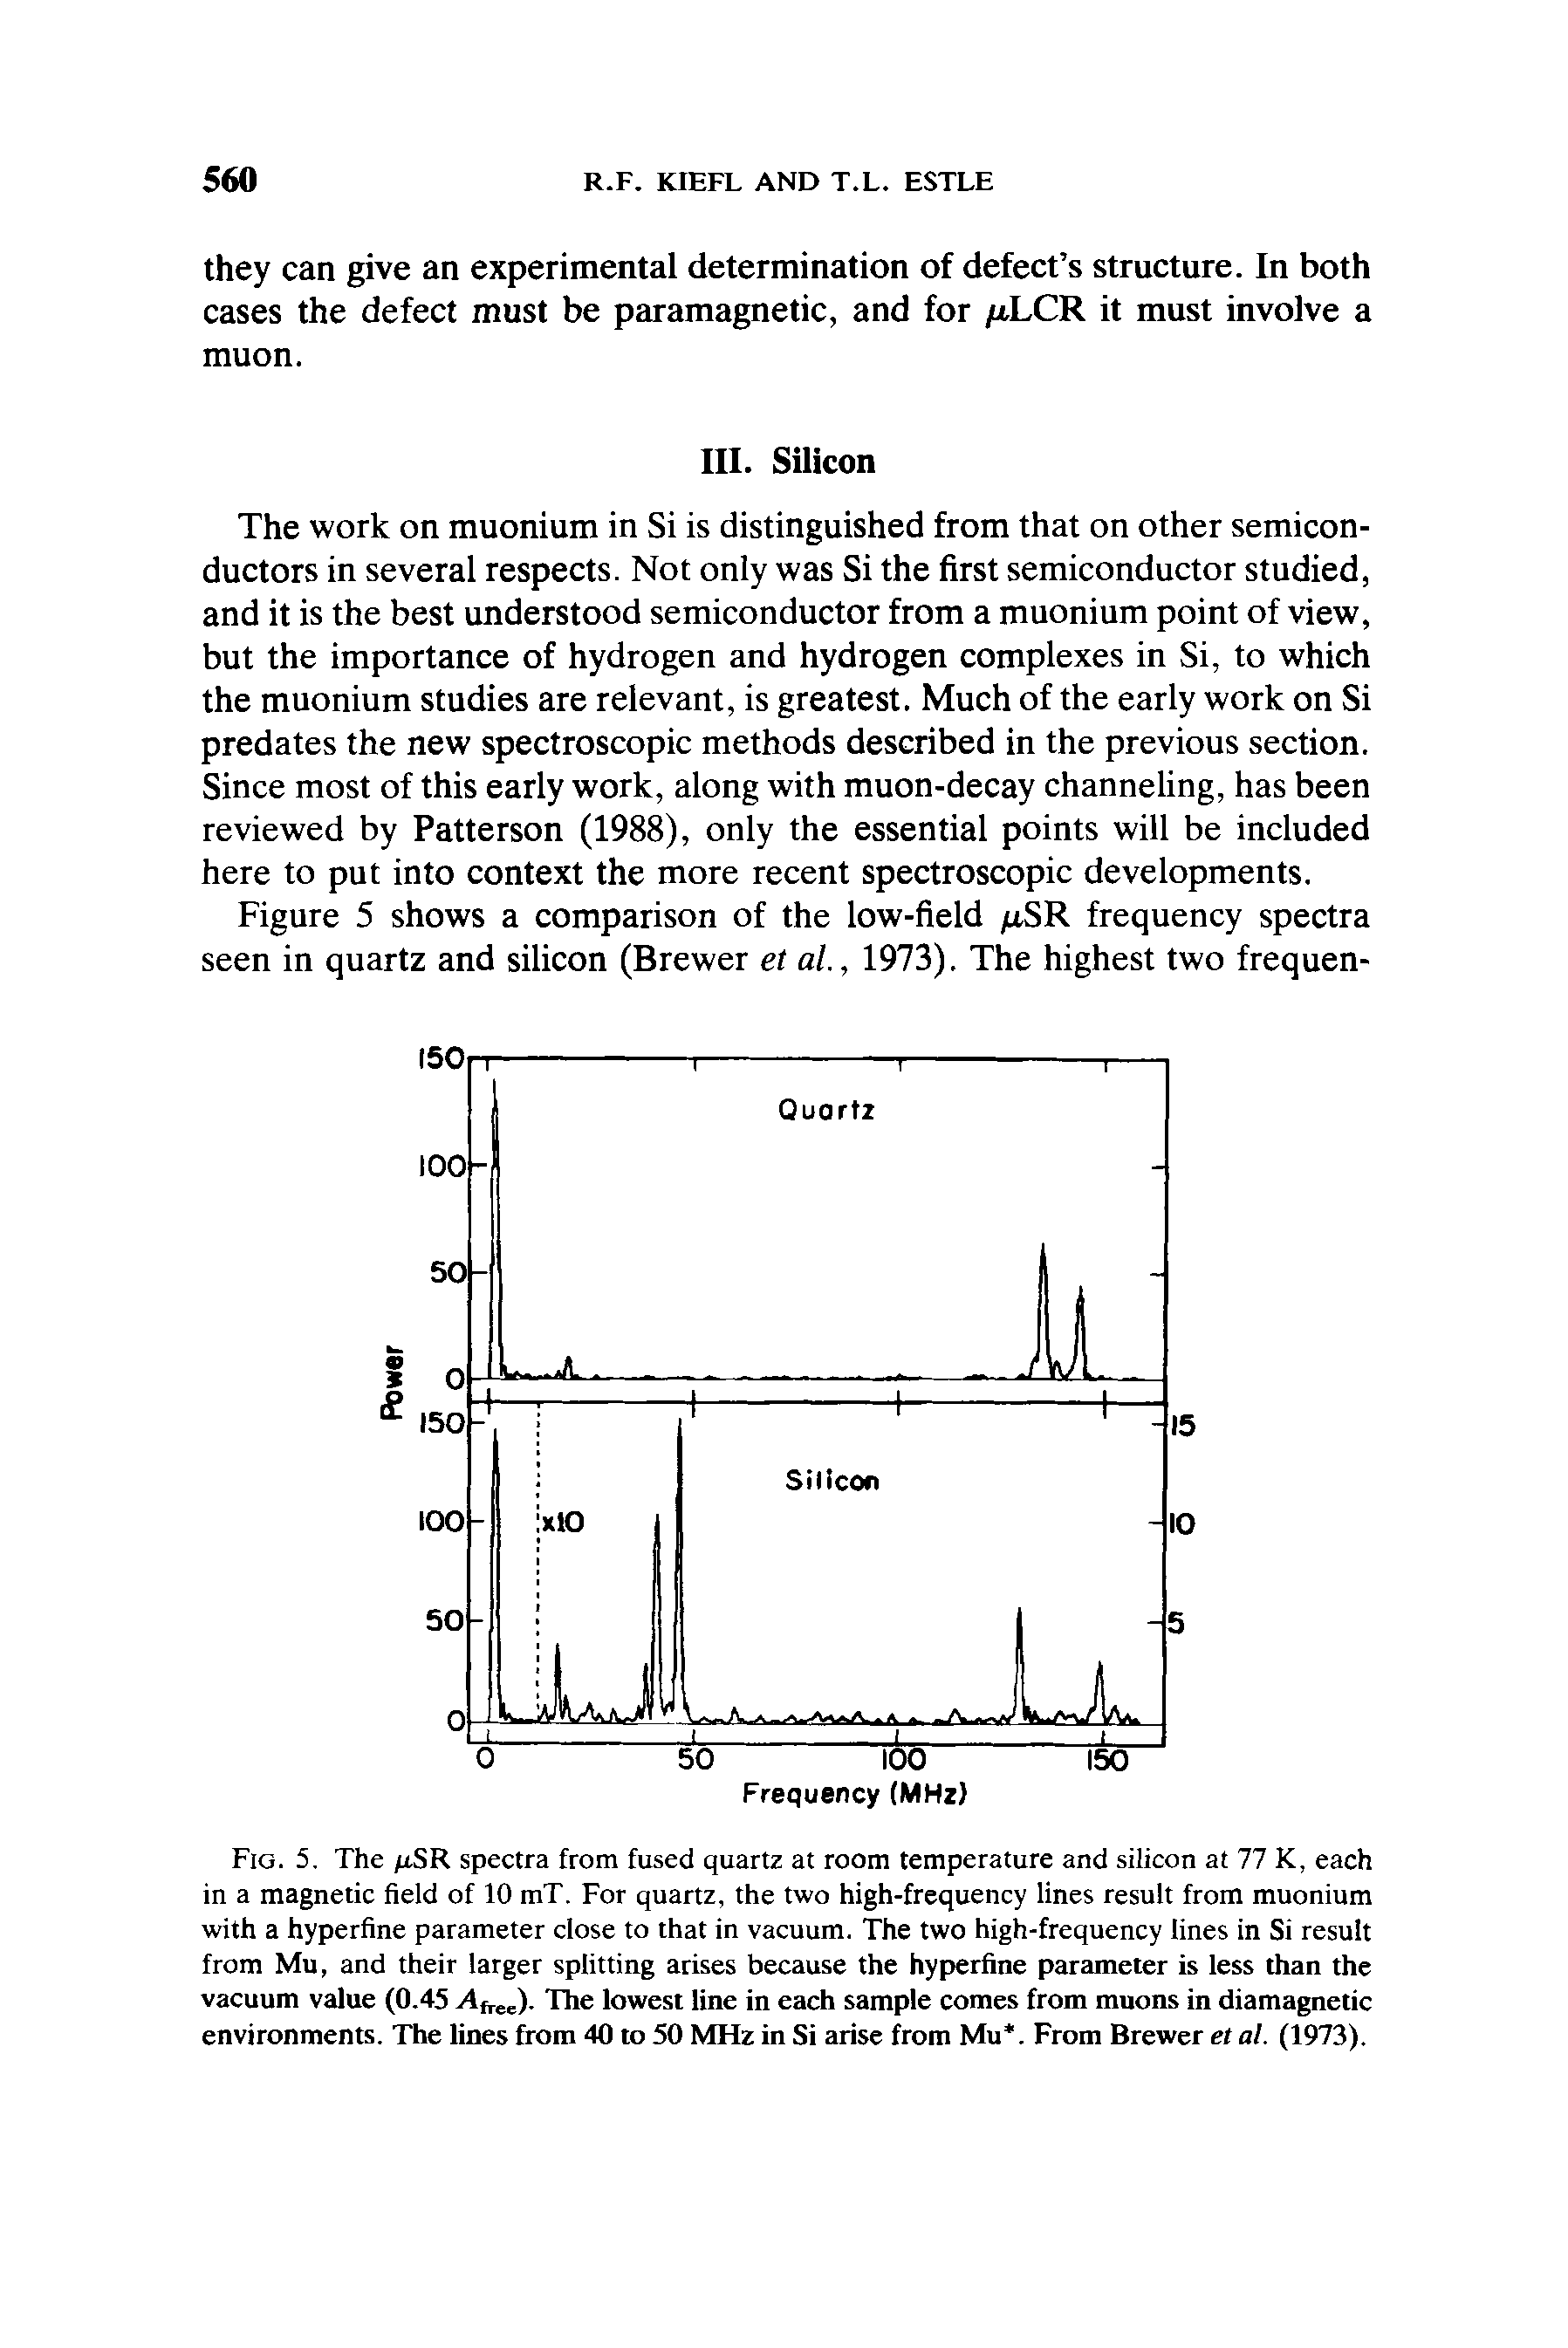 Fig. 5. The /rSR spectra from fused quartz at room temperature and silicon at 77 K, each in a magnetic field of 10 mT. For quartz, the two high-frequency lines result from muonium with a hyperfine parameter close to that in vacuum. The two high-frequency lines in Si result from Mu, and their larger splitting arises because the hyperfine parameter is less than the vacuum value (0.45 Afree). The lowest line in each sample comes from muons in diamagnetic environments. The lines from 40 to 50 MHz in Si arise from Mu. From Brewer et al. (1973).